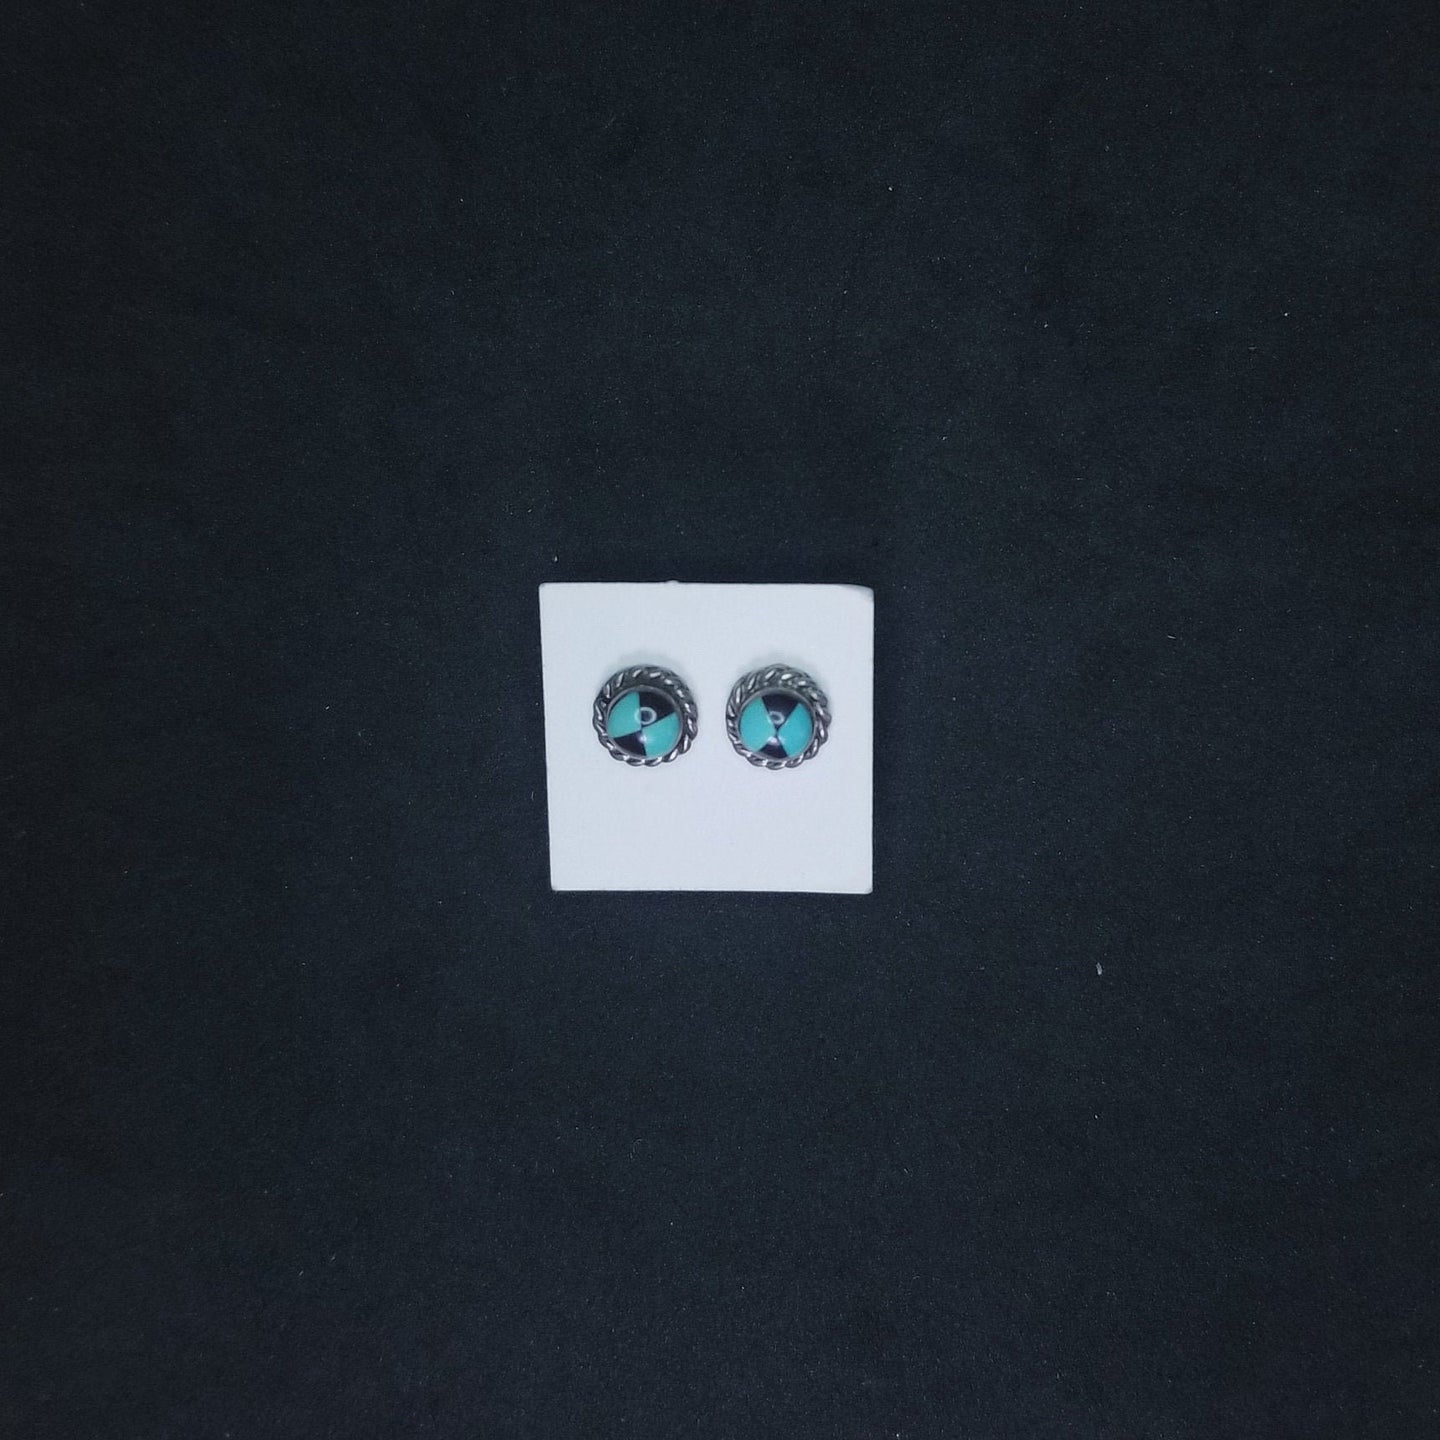 5 mm round Turquoise and Black Onyx sterling silver stud earrings